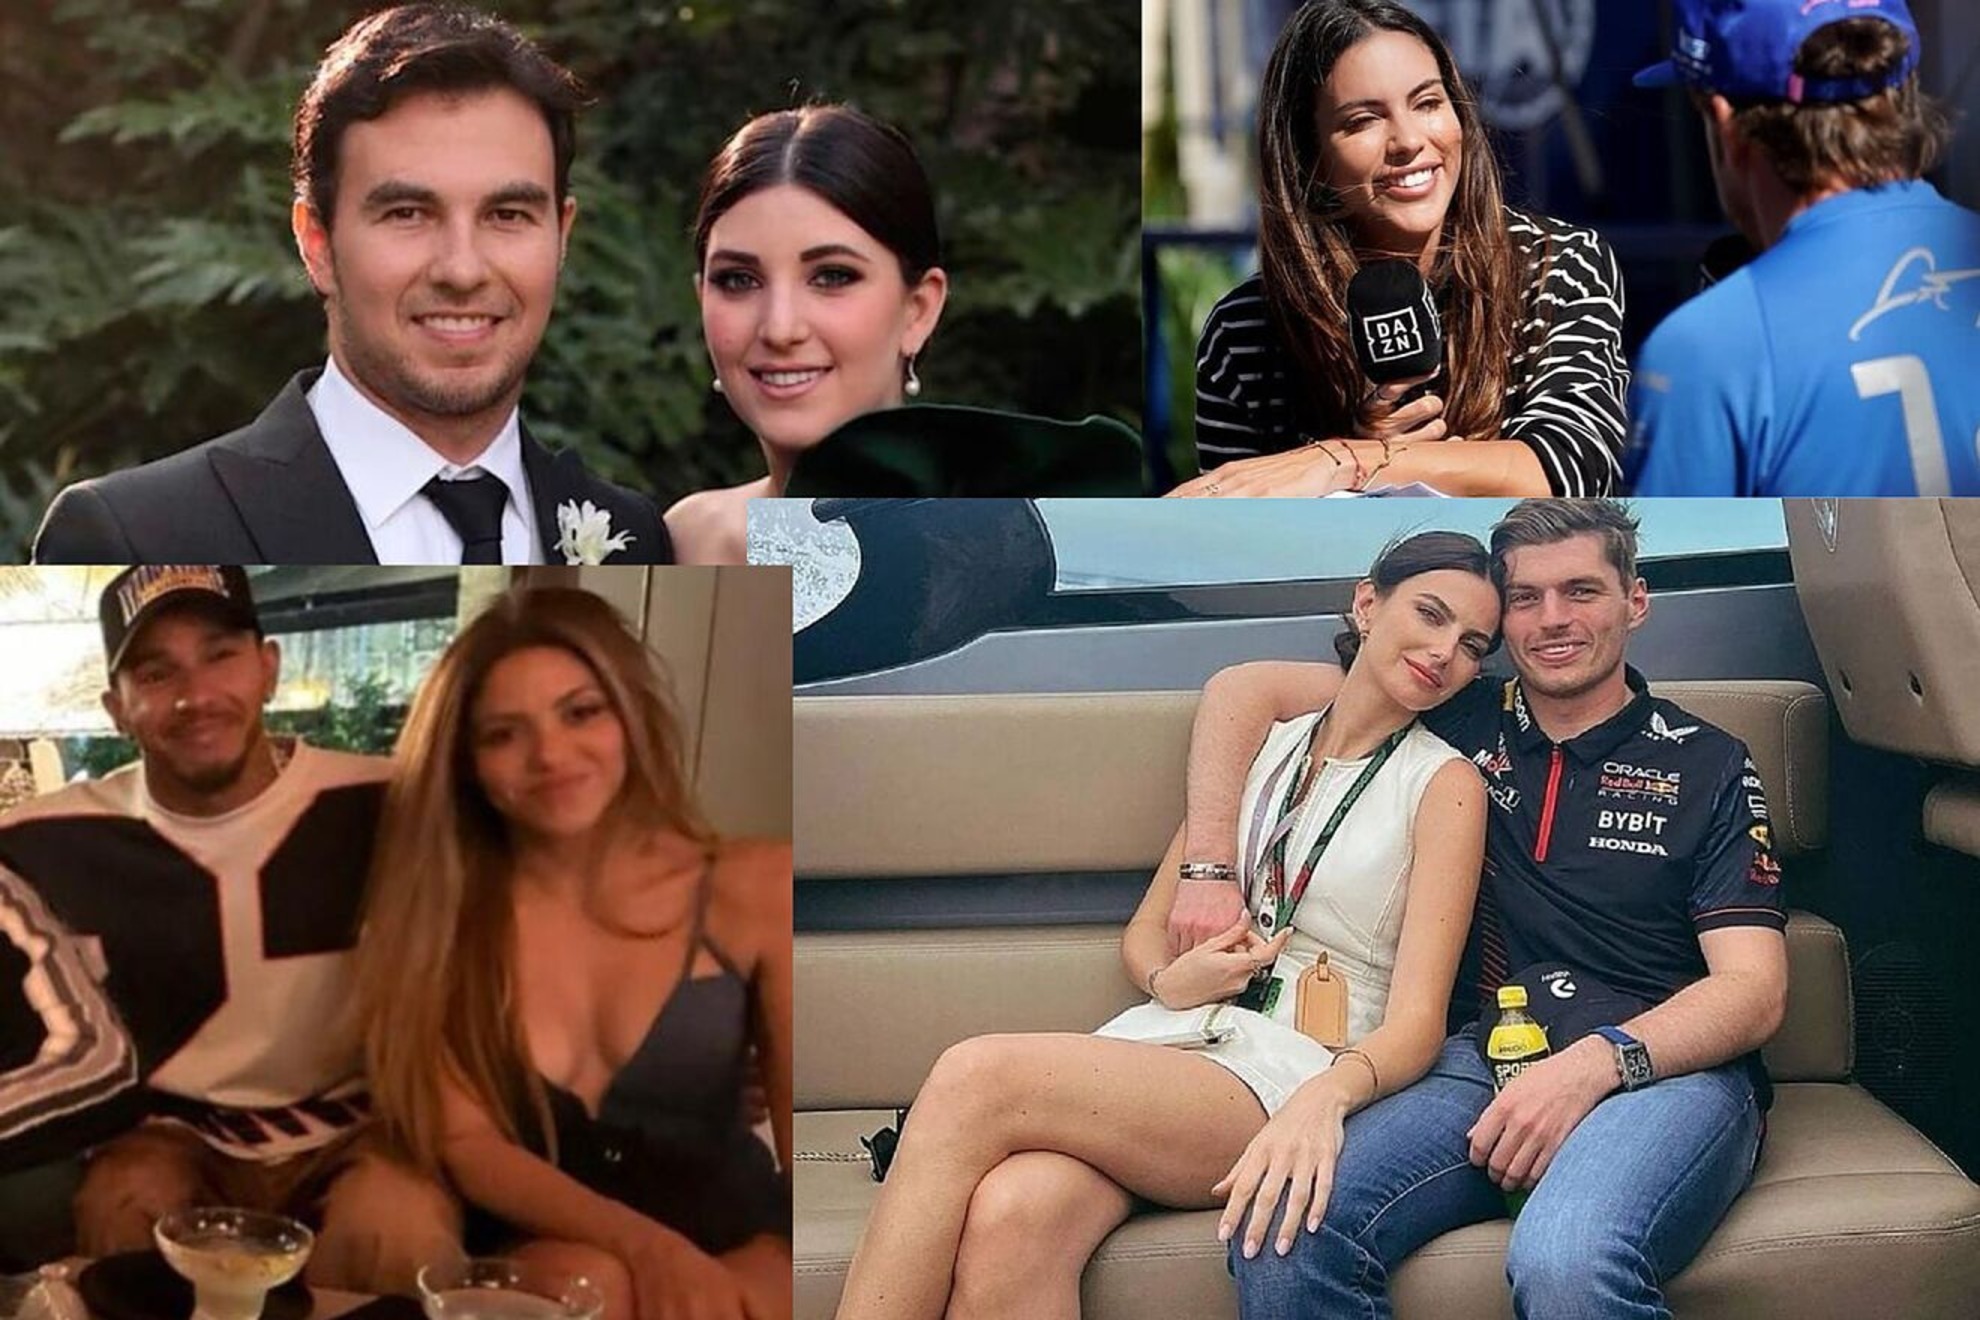 Ranking the 10 Formula 1 WAGS who earn the most on Instagram: Shakira's turnover is mind-blowing